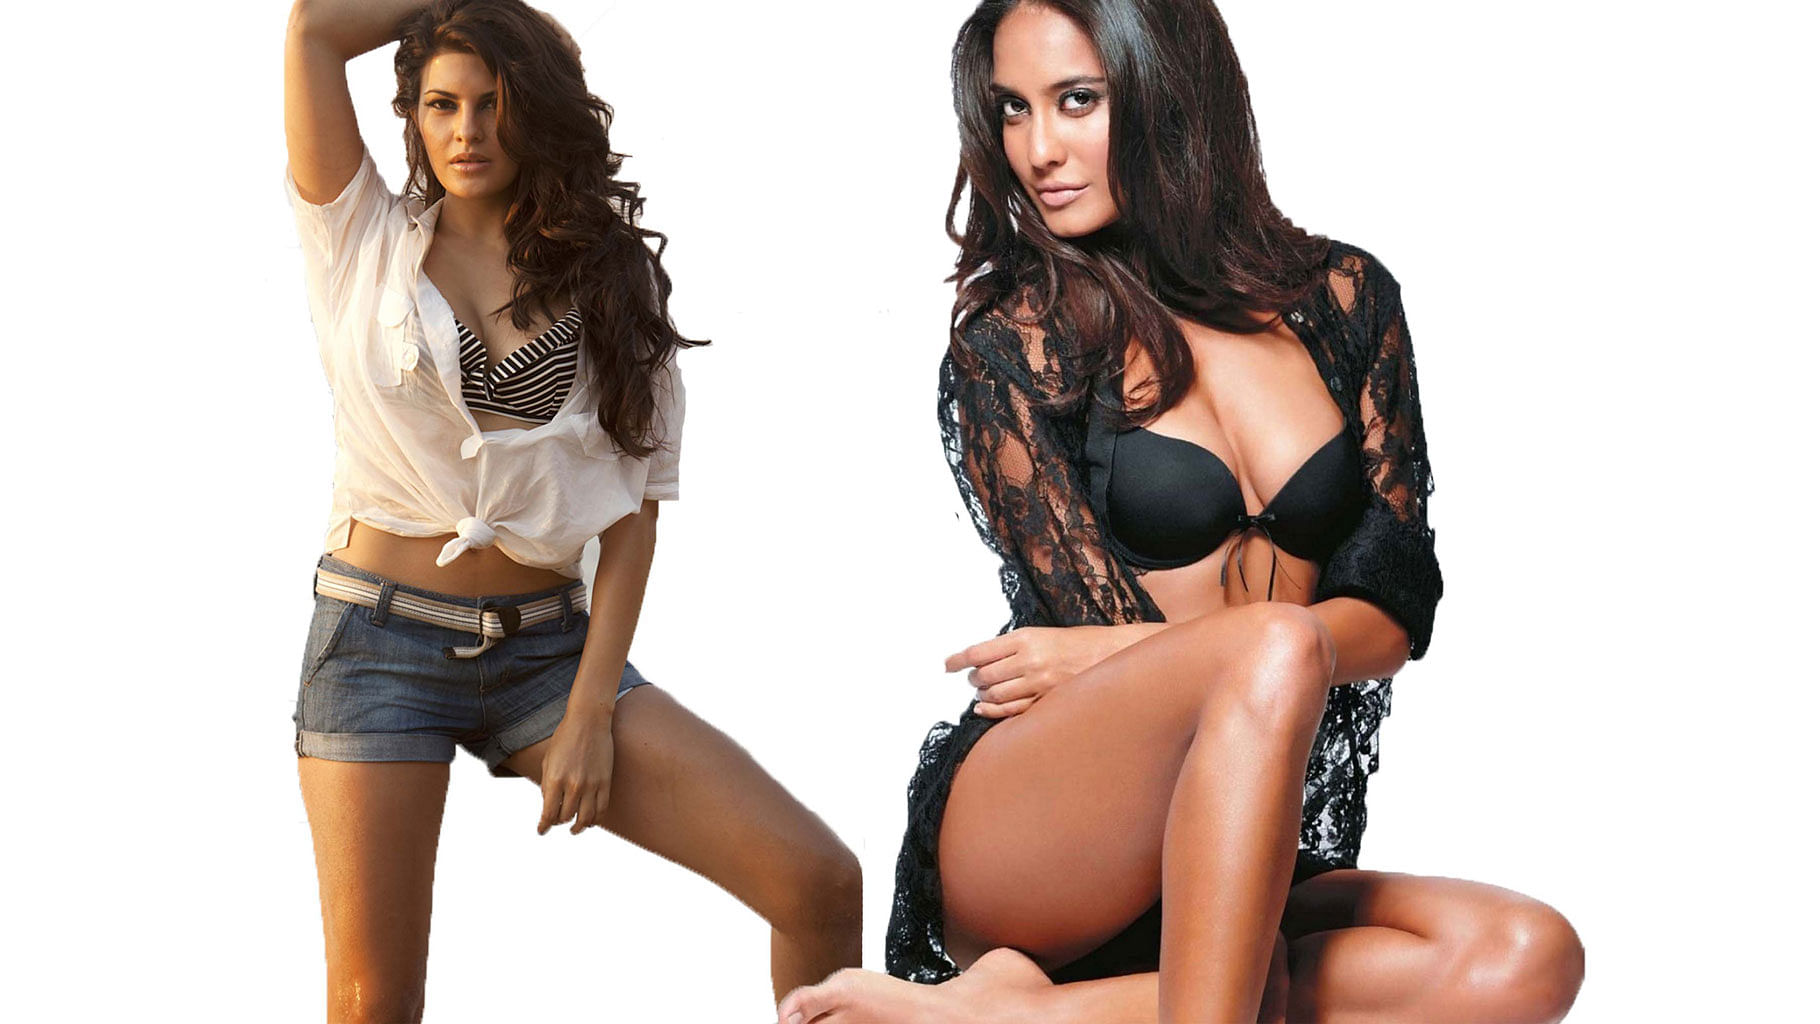 Jacqueline Fernandez and Lisa Haydon (L to R) (Photo: Altered by The Quint)